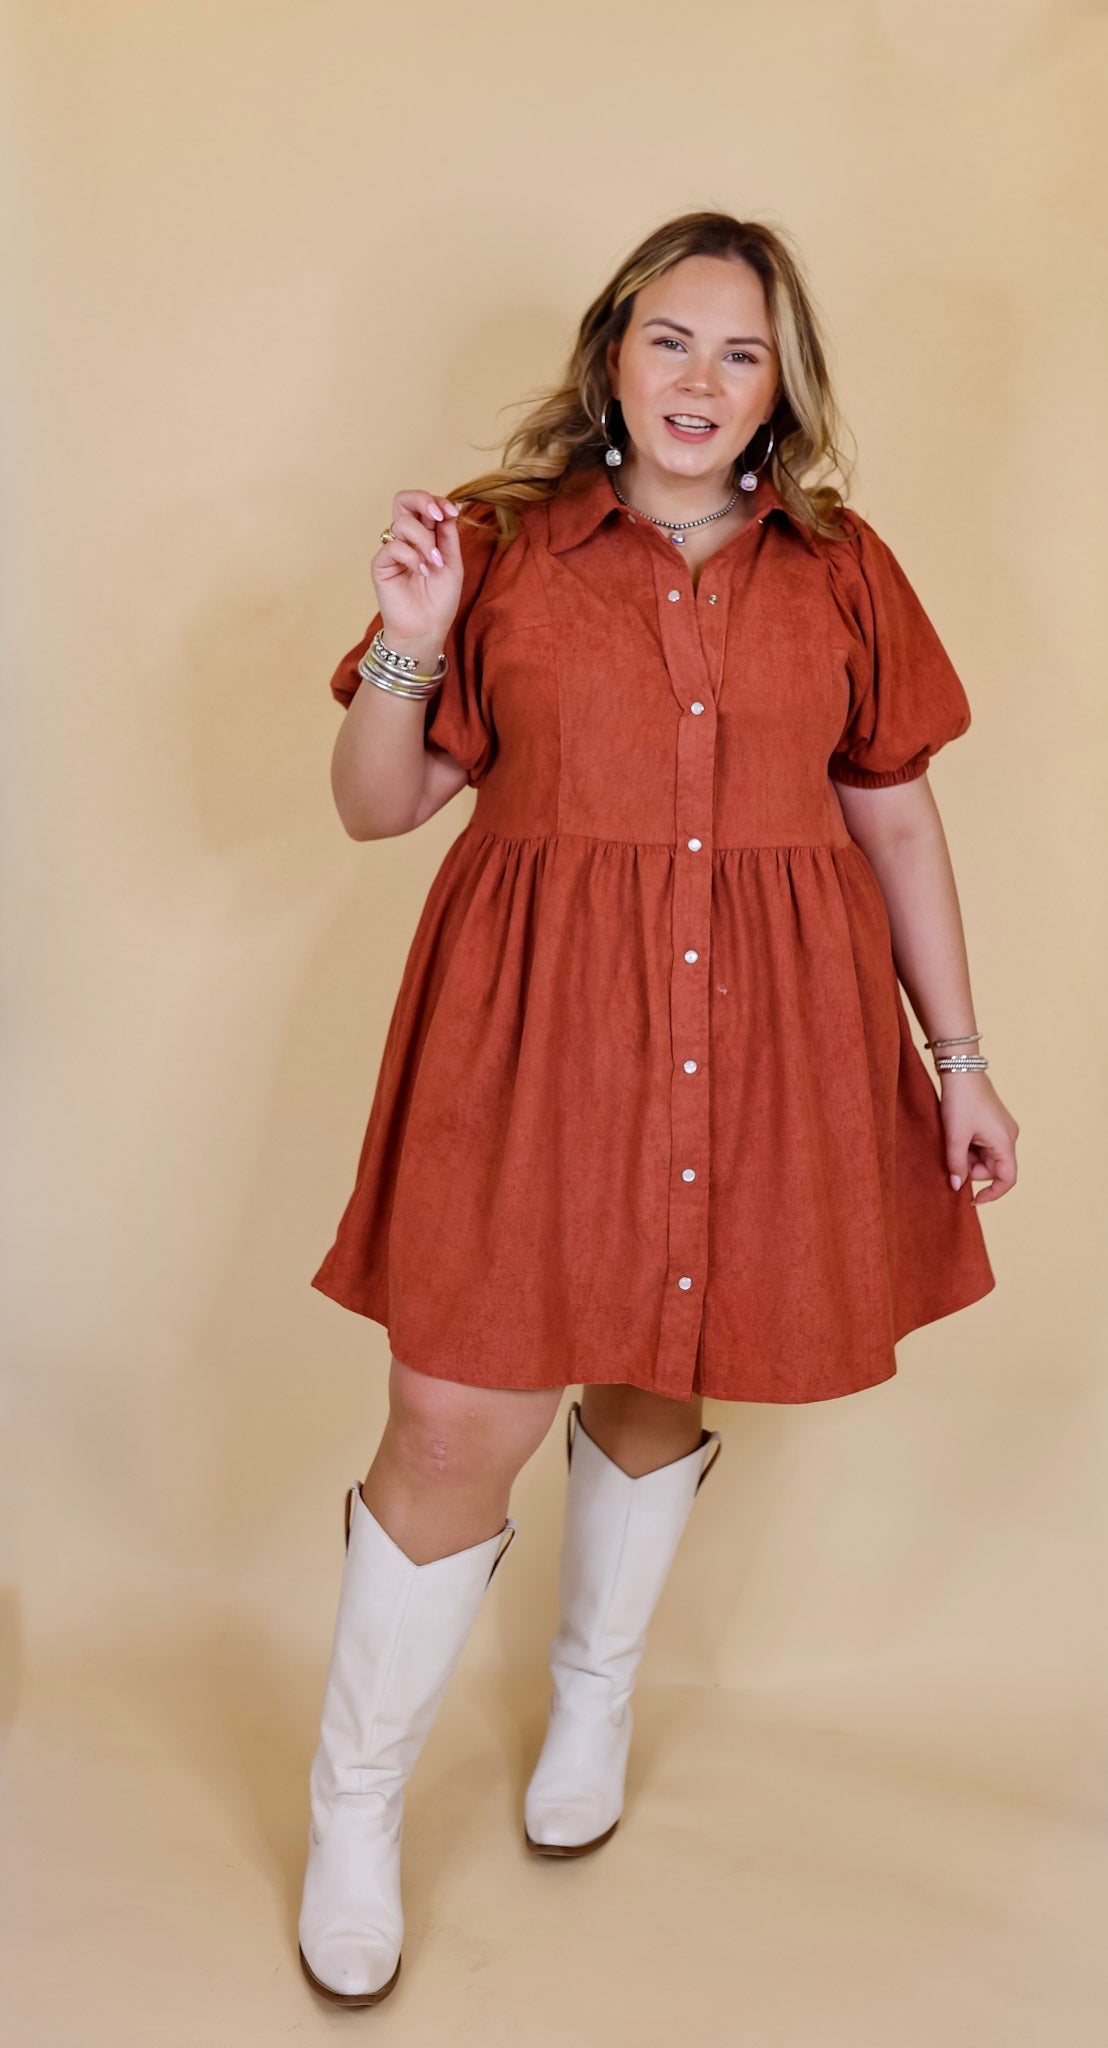 Adventures Ahead Button Up Corduroy Babydoll Dress in Terracotta - Giddy Up Glamour Boutique